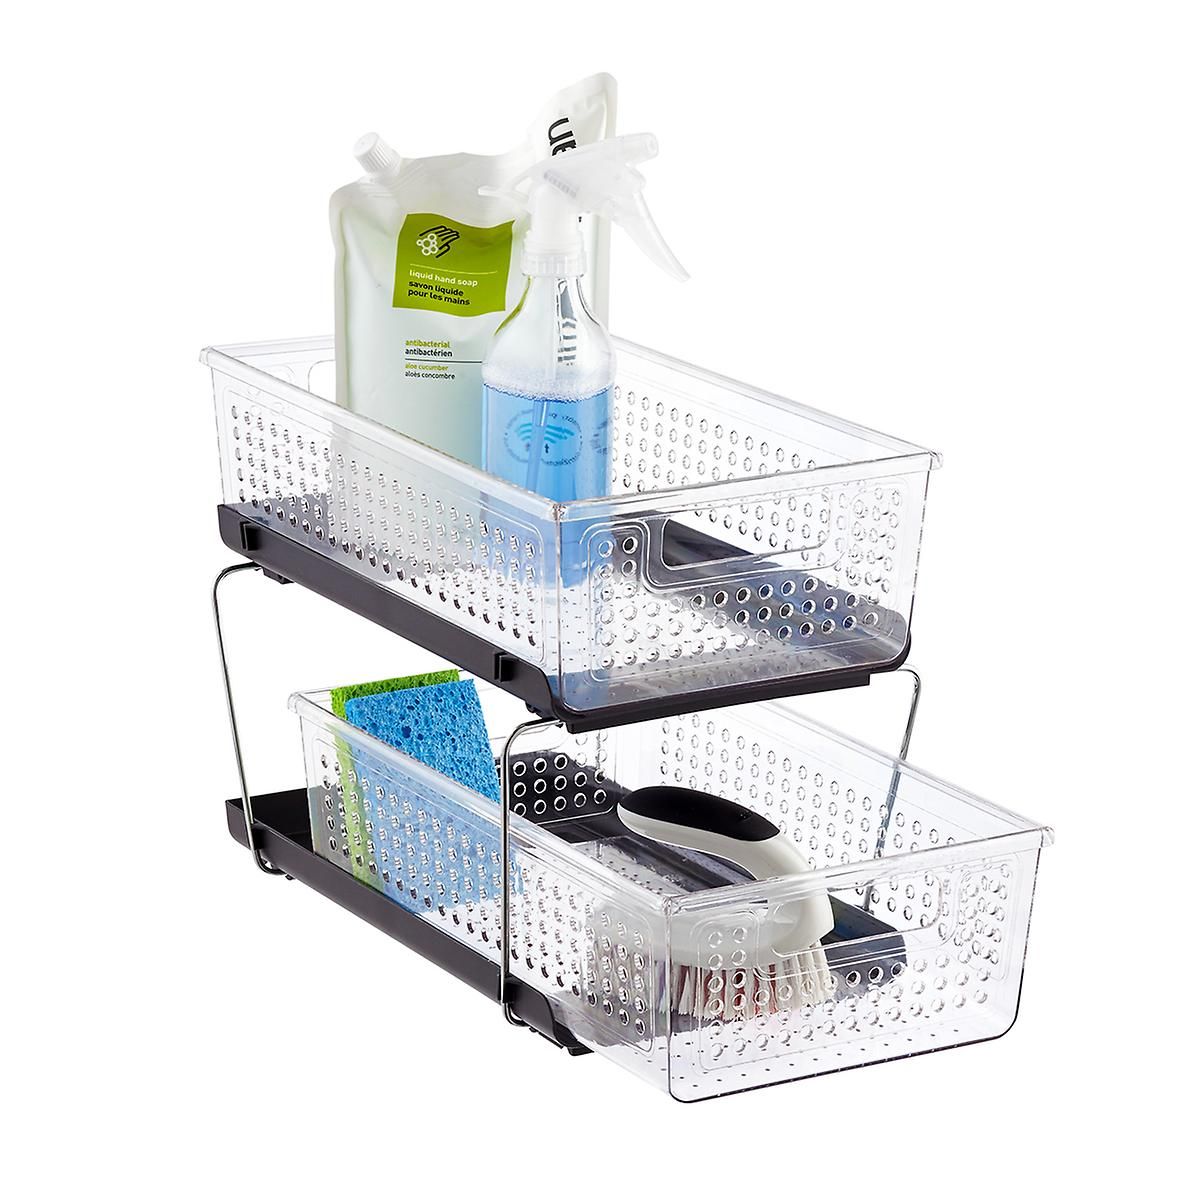 madesmart 2-Tier Divided Cabinet Organizer | The Container Store